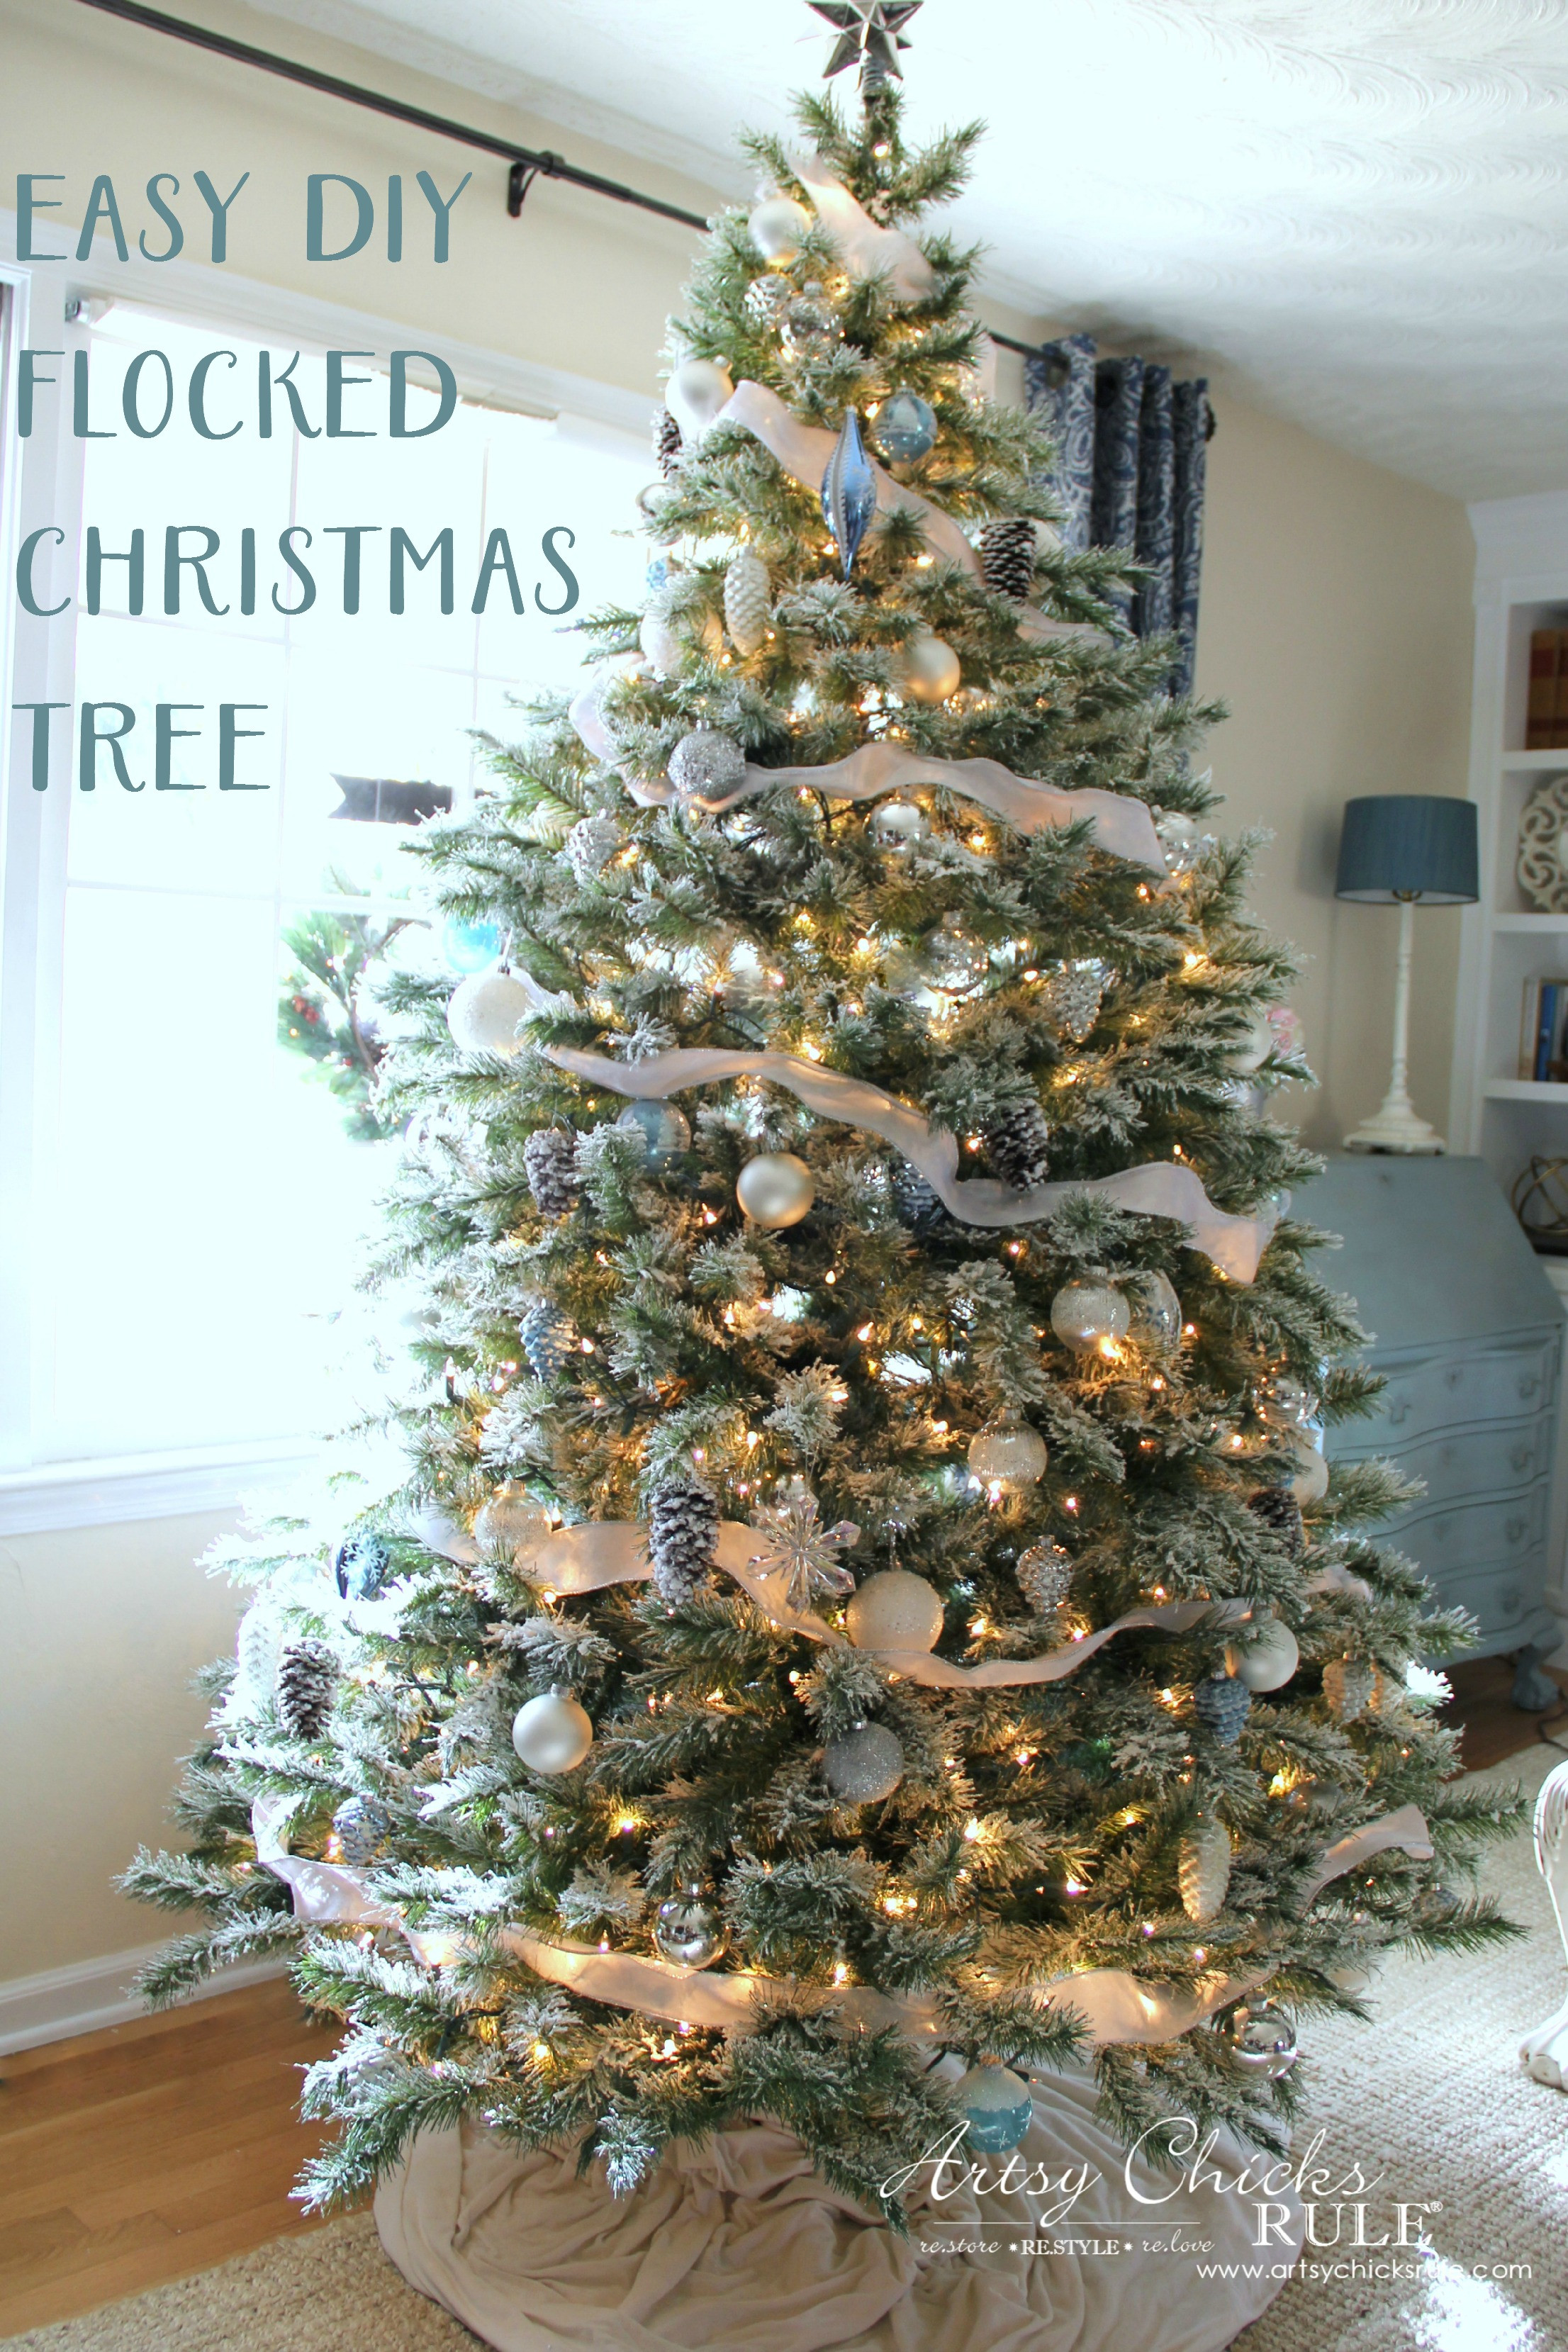 DIY Flocked Christmas Tree
 DIY Flocked Tree Wreaths and More Thrifty Holiday Decor